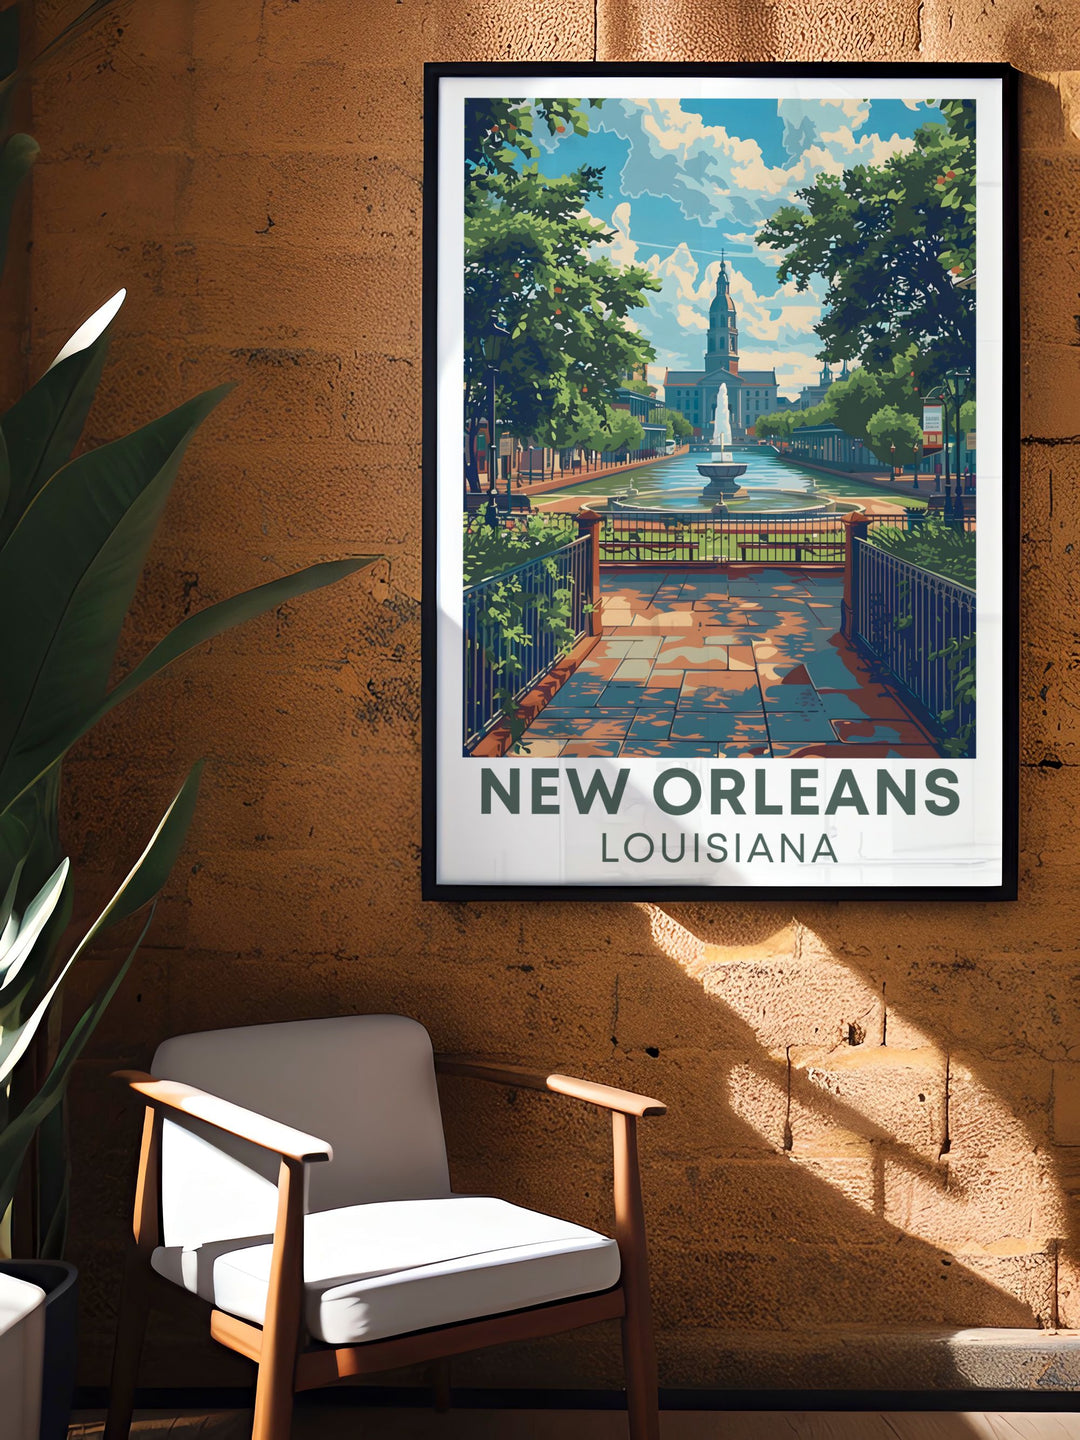 Charming Jackson Square travel print featuring the lively surroundings and historic architecture of New Orleans making it an excellent choice for home decor or as a thoughtful gift for those who cherish their New Orleans travels